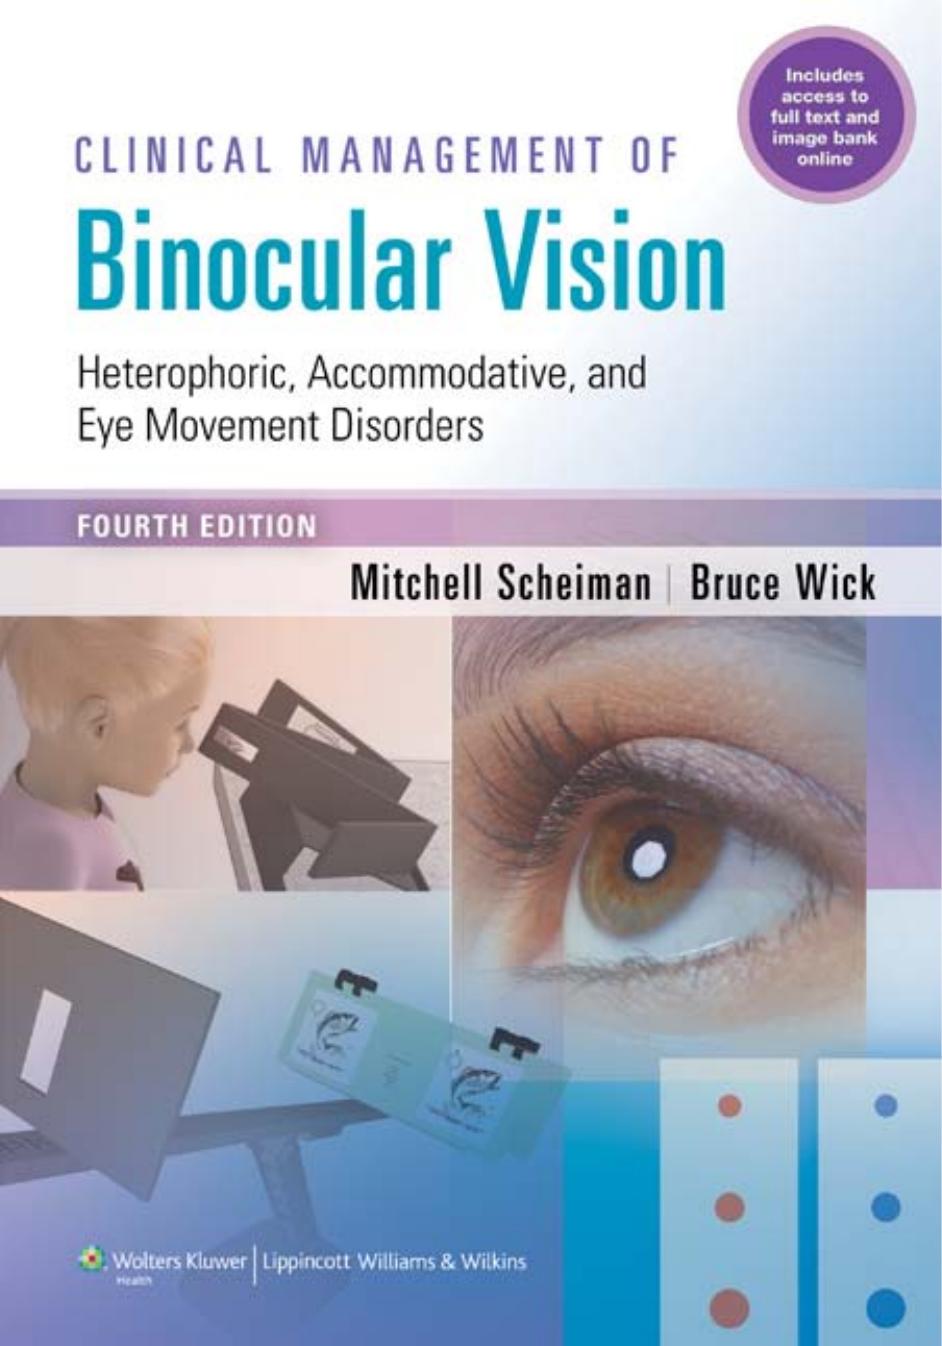 Clinical management of binocular vision : heterophoric, accommodative, and eye movement disorders